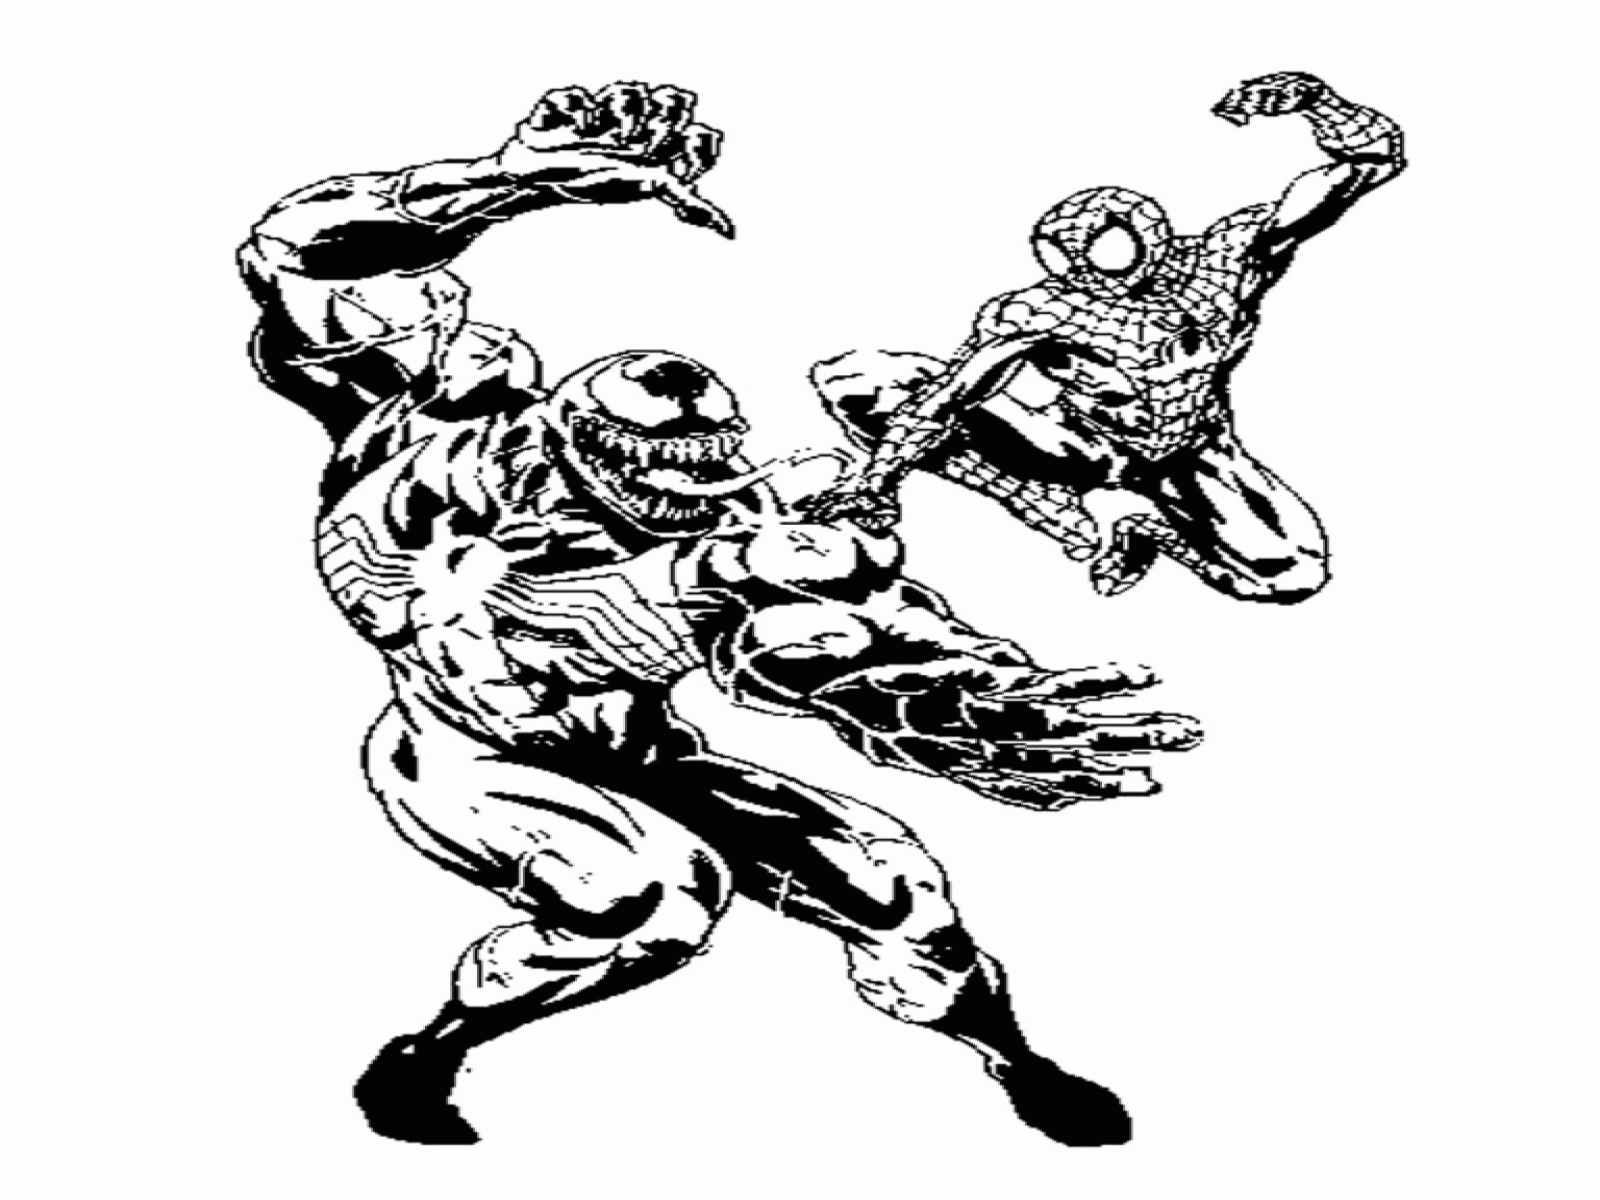 Venom Vs Spiderman Coloring Pages - Coloring Home